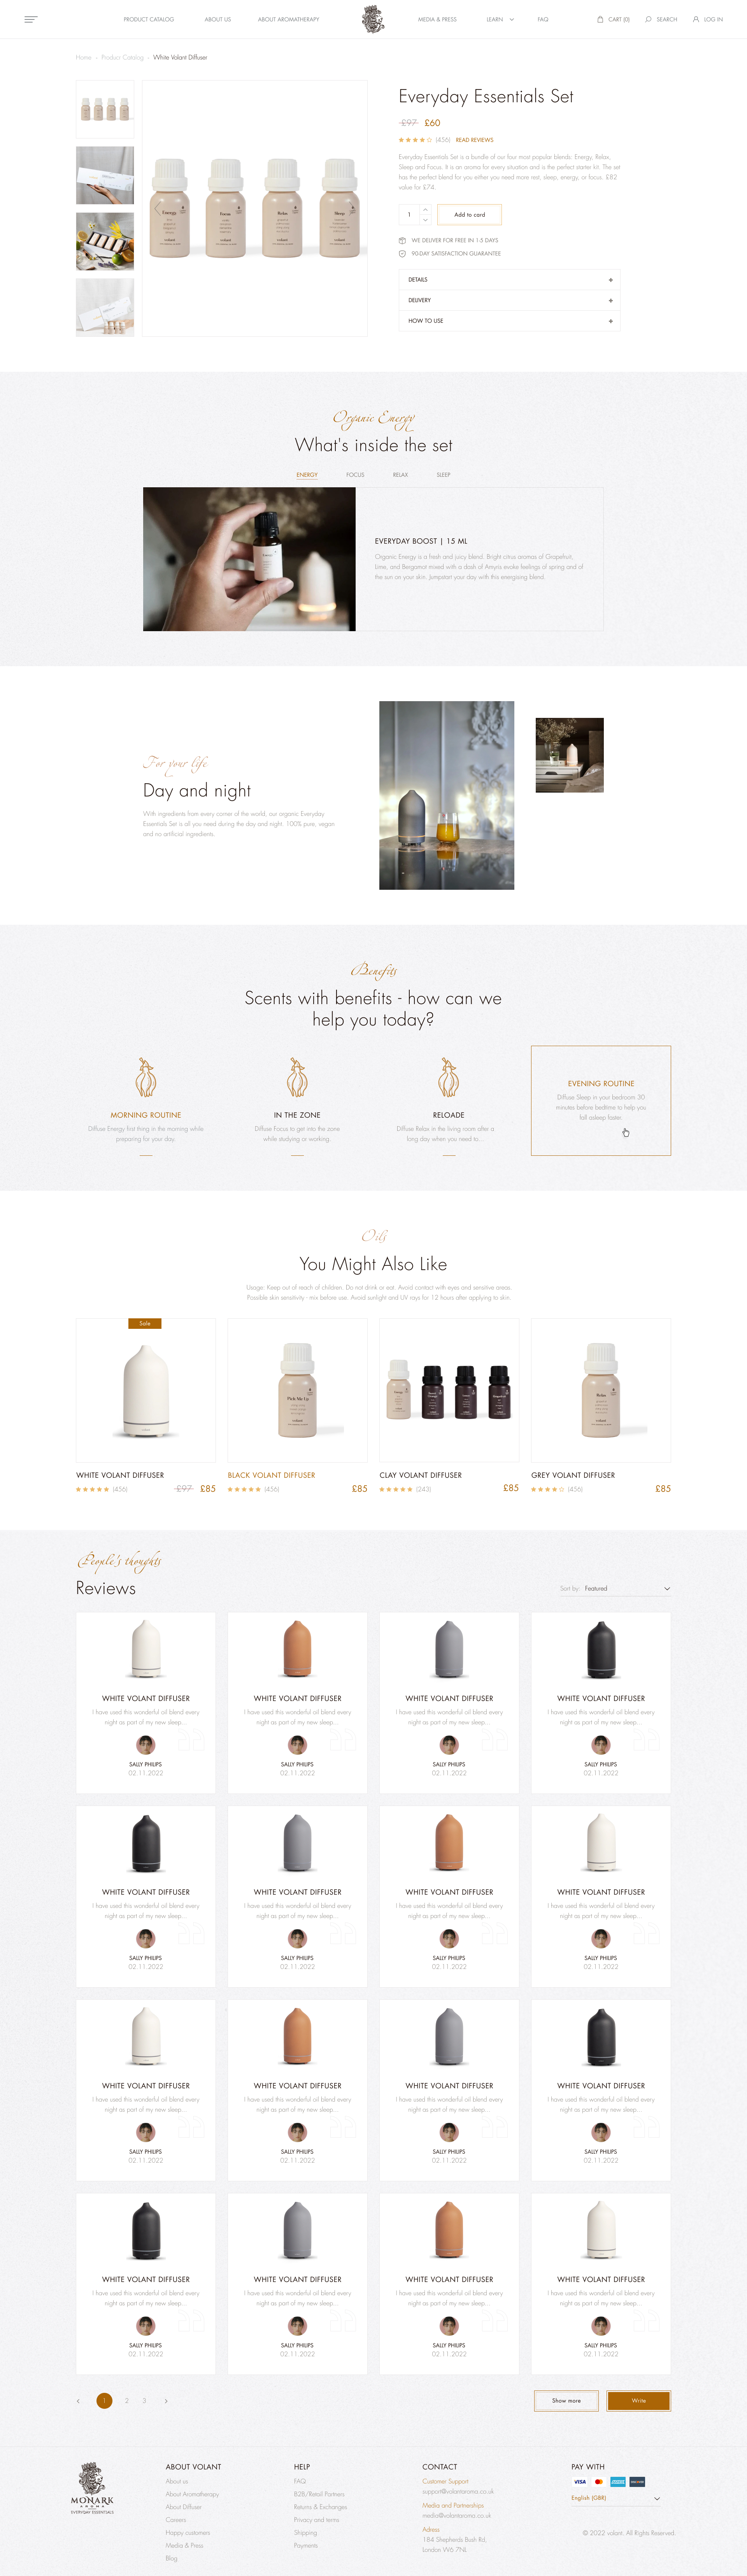 Monark-aroma_05_Oil_Sets_Product_Page_0.1